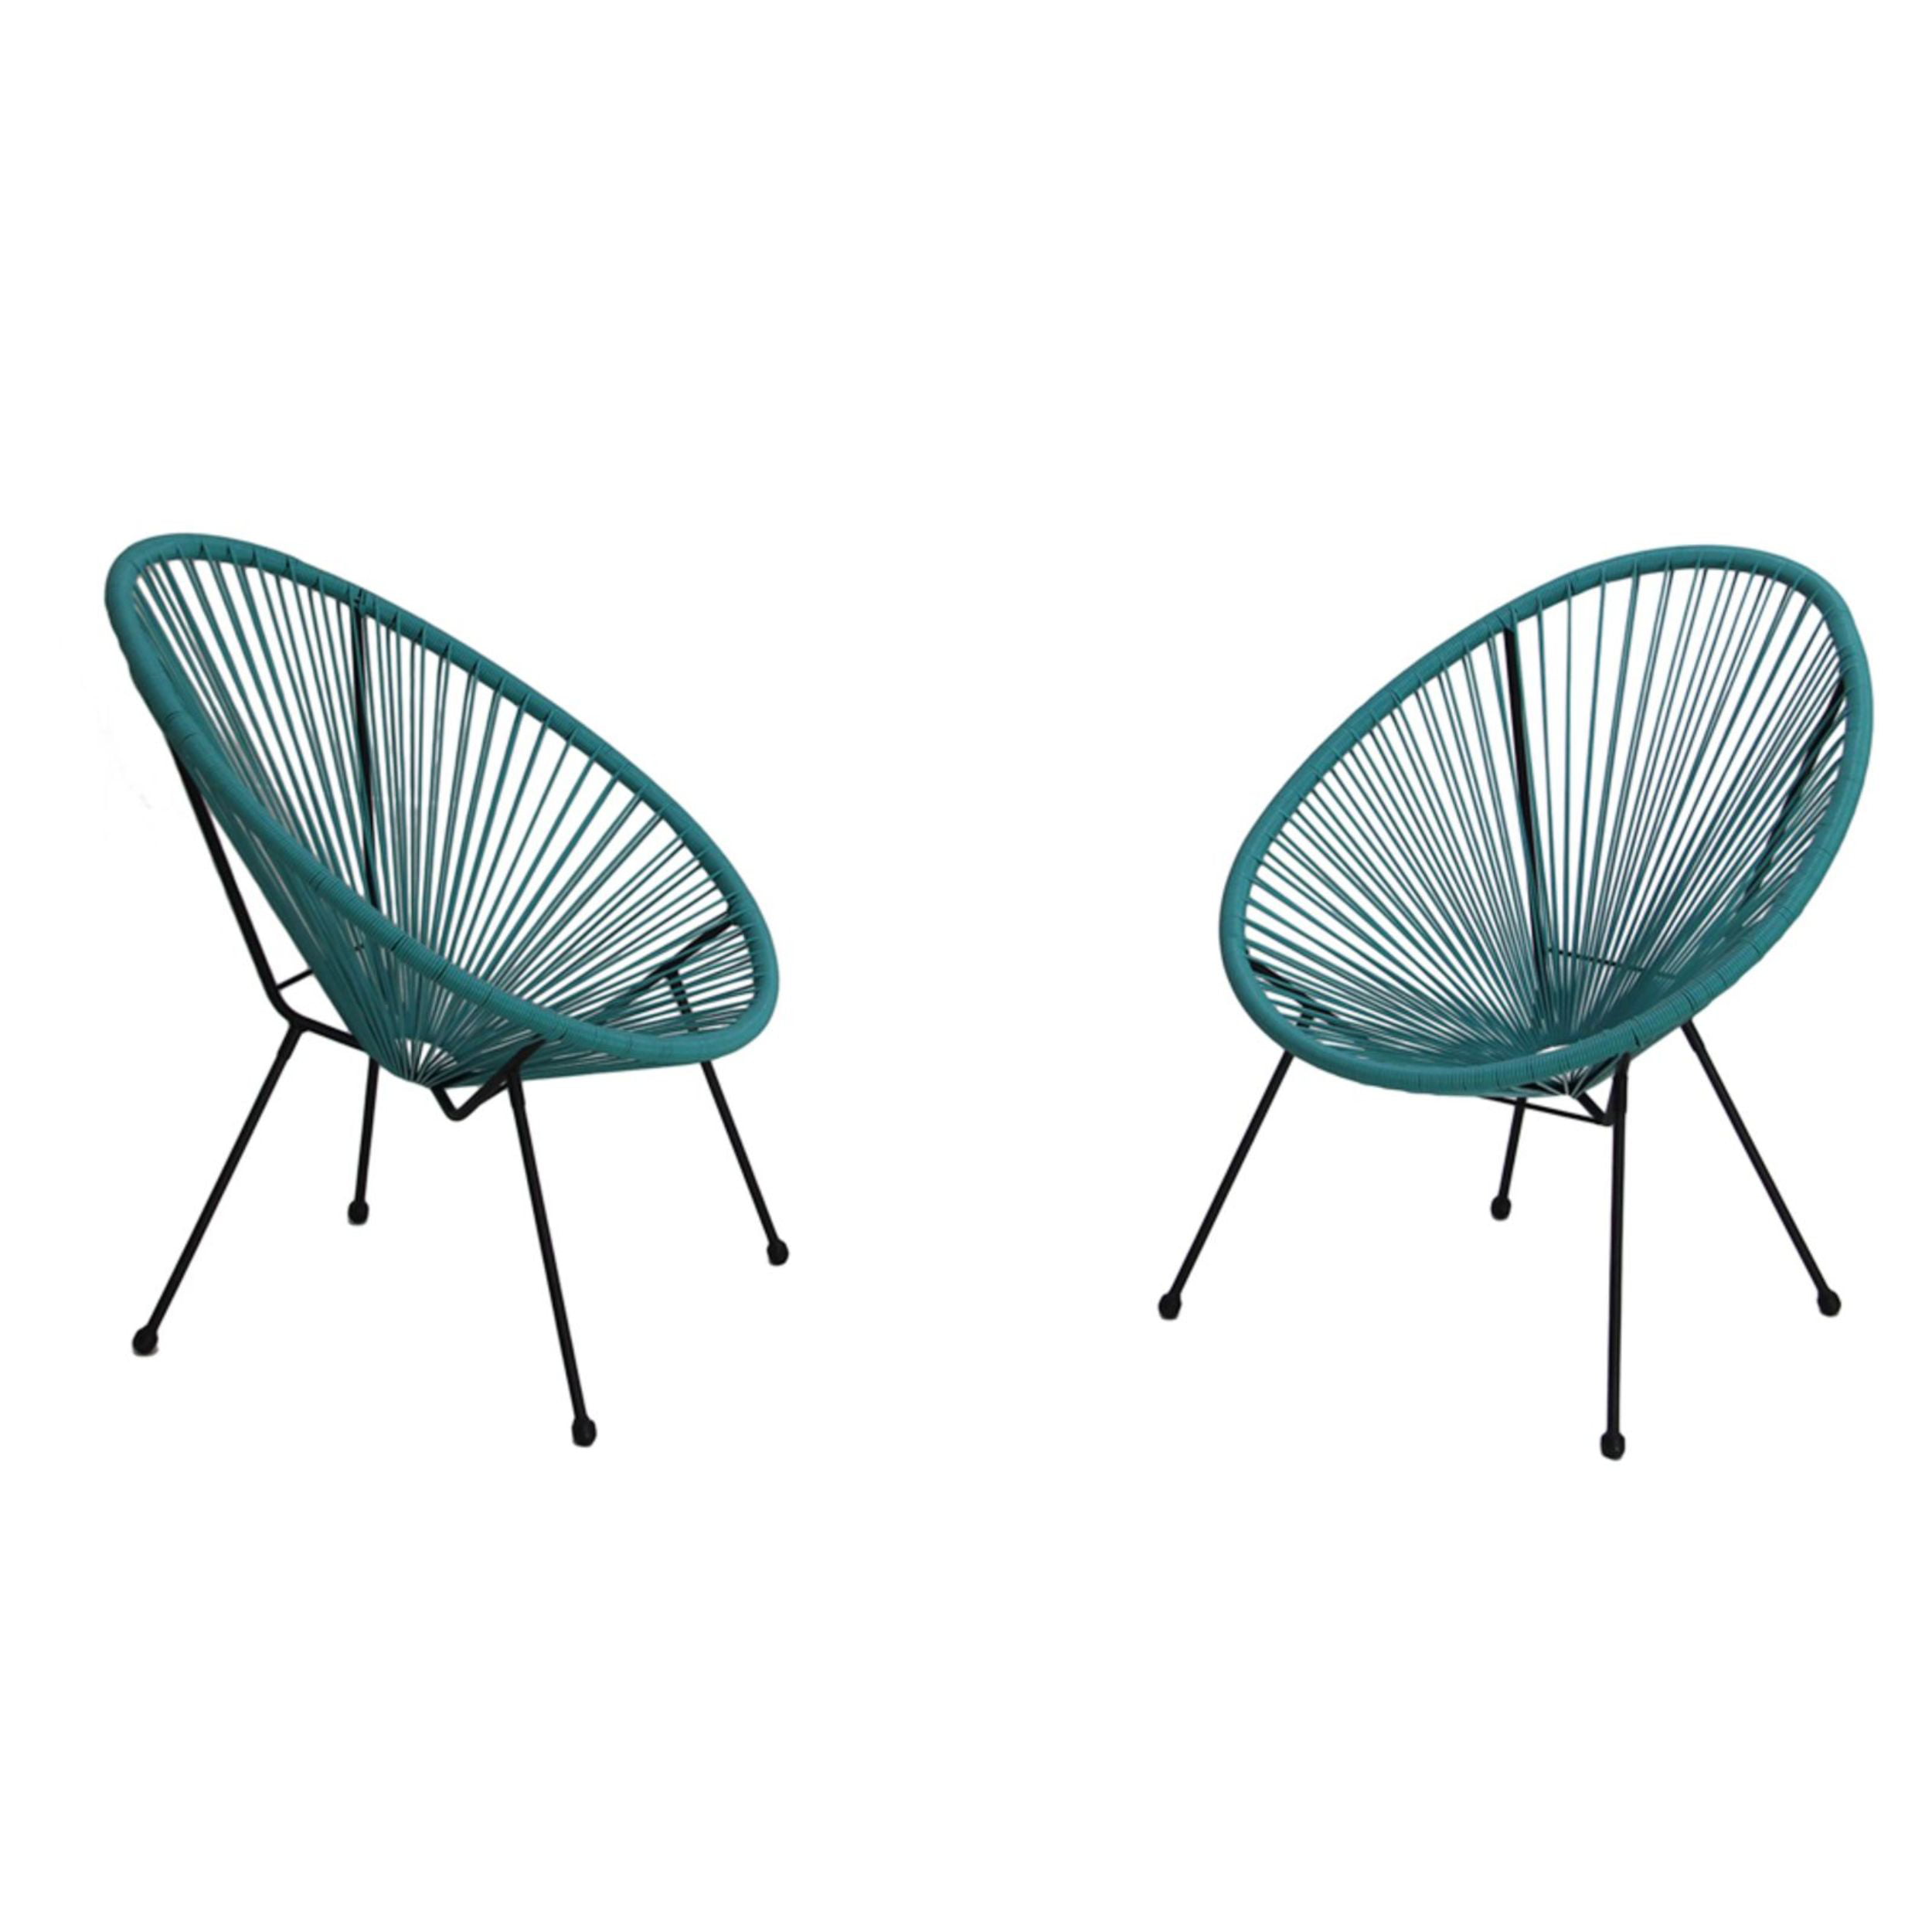 HighlanderHome Acapulco Chair For Indoor And Outdoor